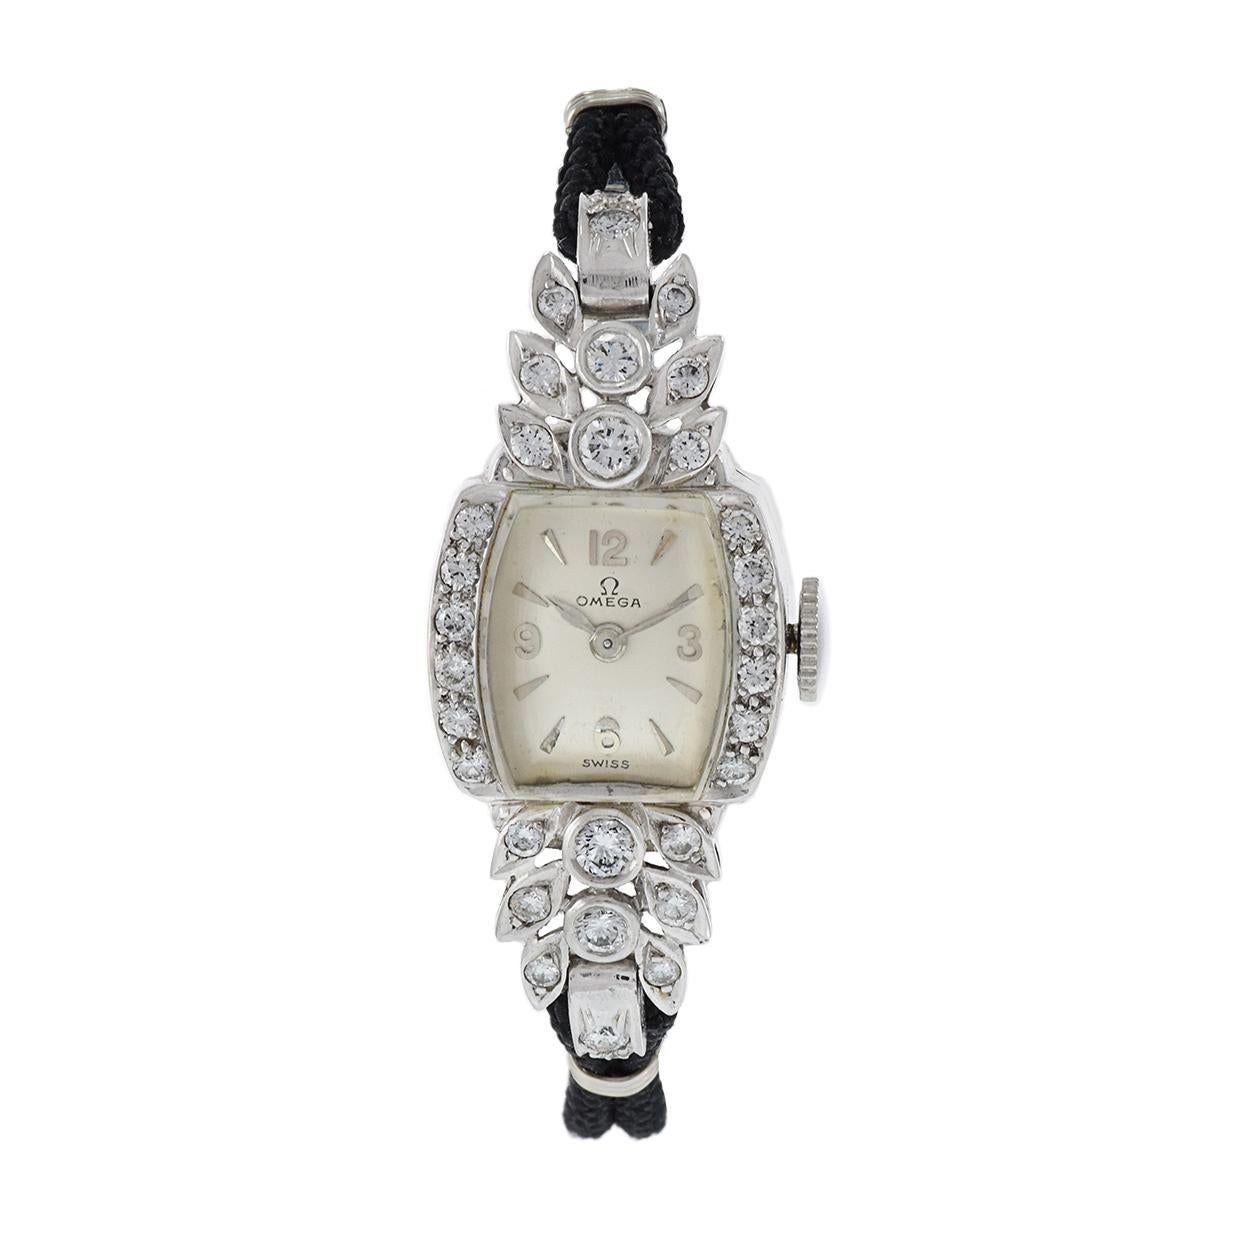 Elegance and history converge in this vintage Omega ladies' diamond watch from the 1950s. Encased in a petite 12x34mm platinum and diamond-studded case and paired with a sleek black nylon strap, this timepiece is a true work of art. With a 17-jewel